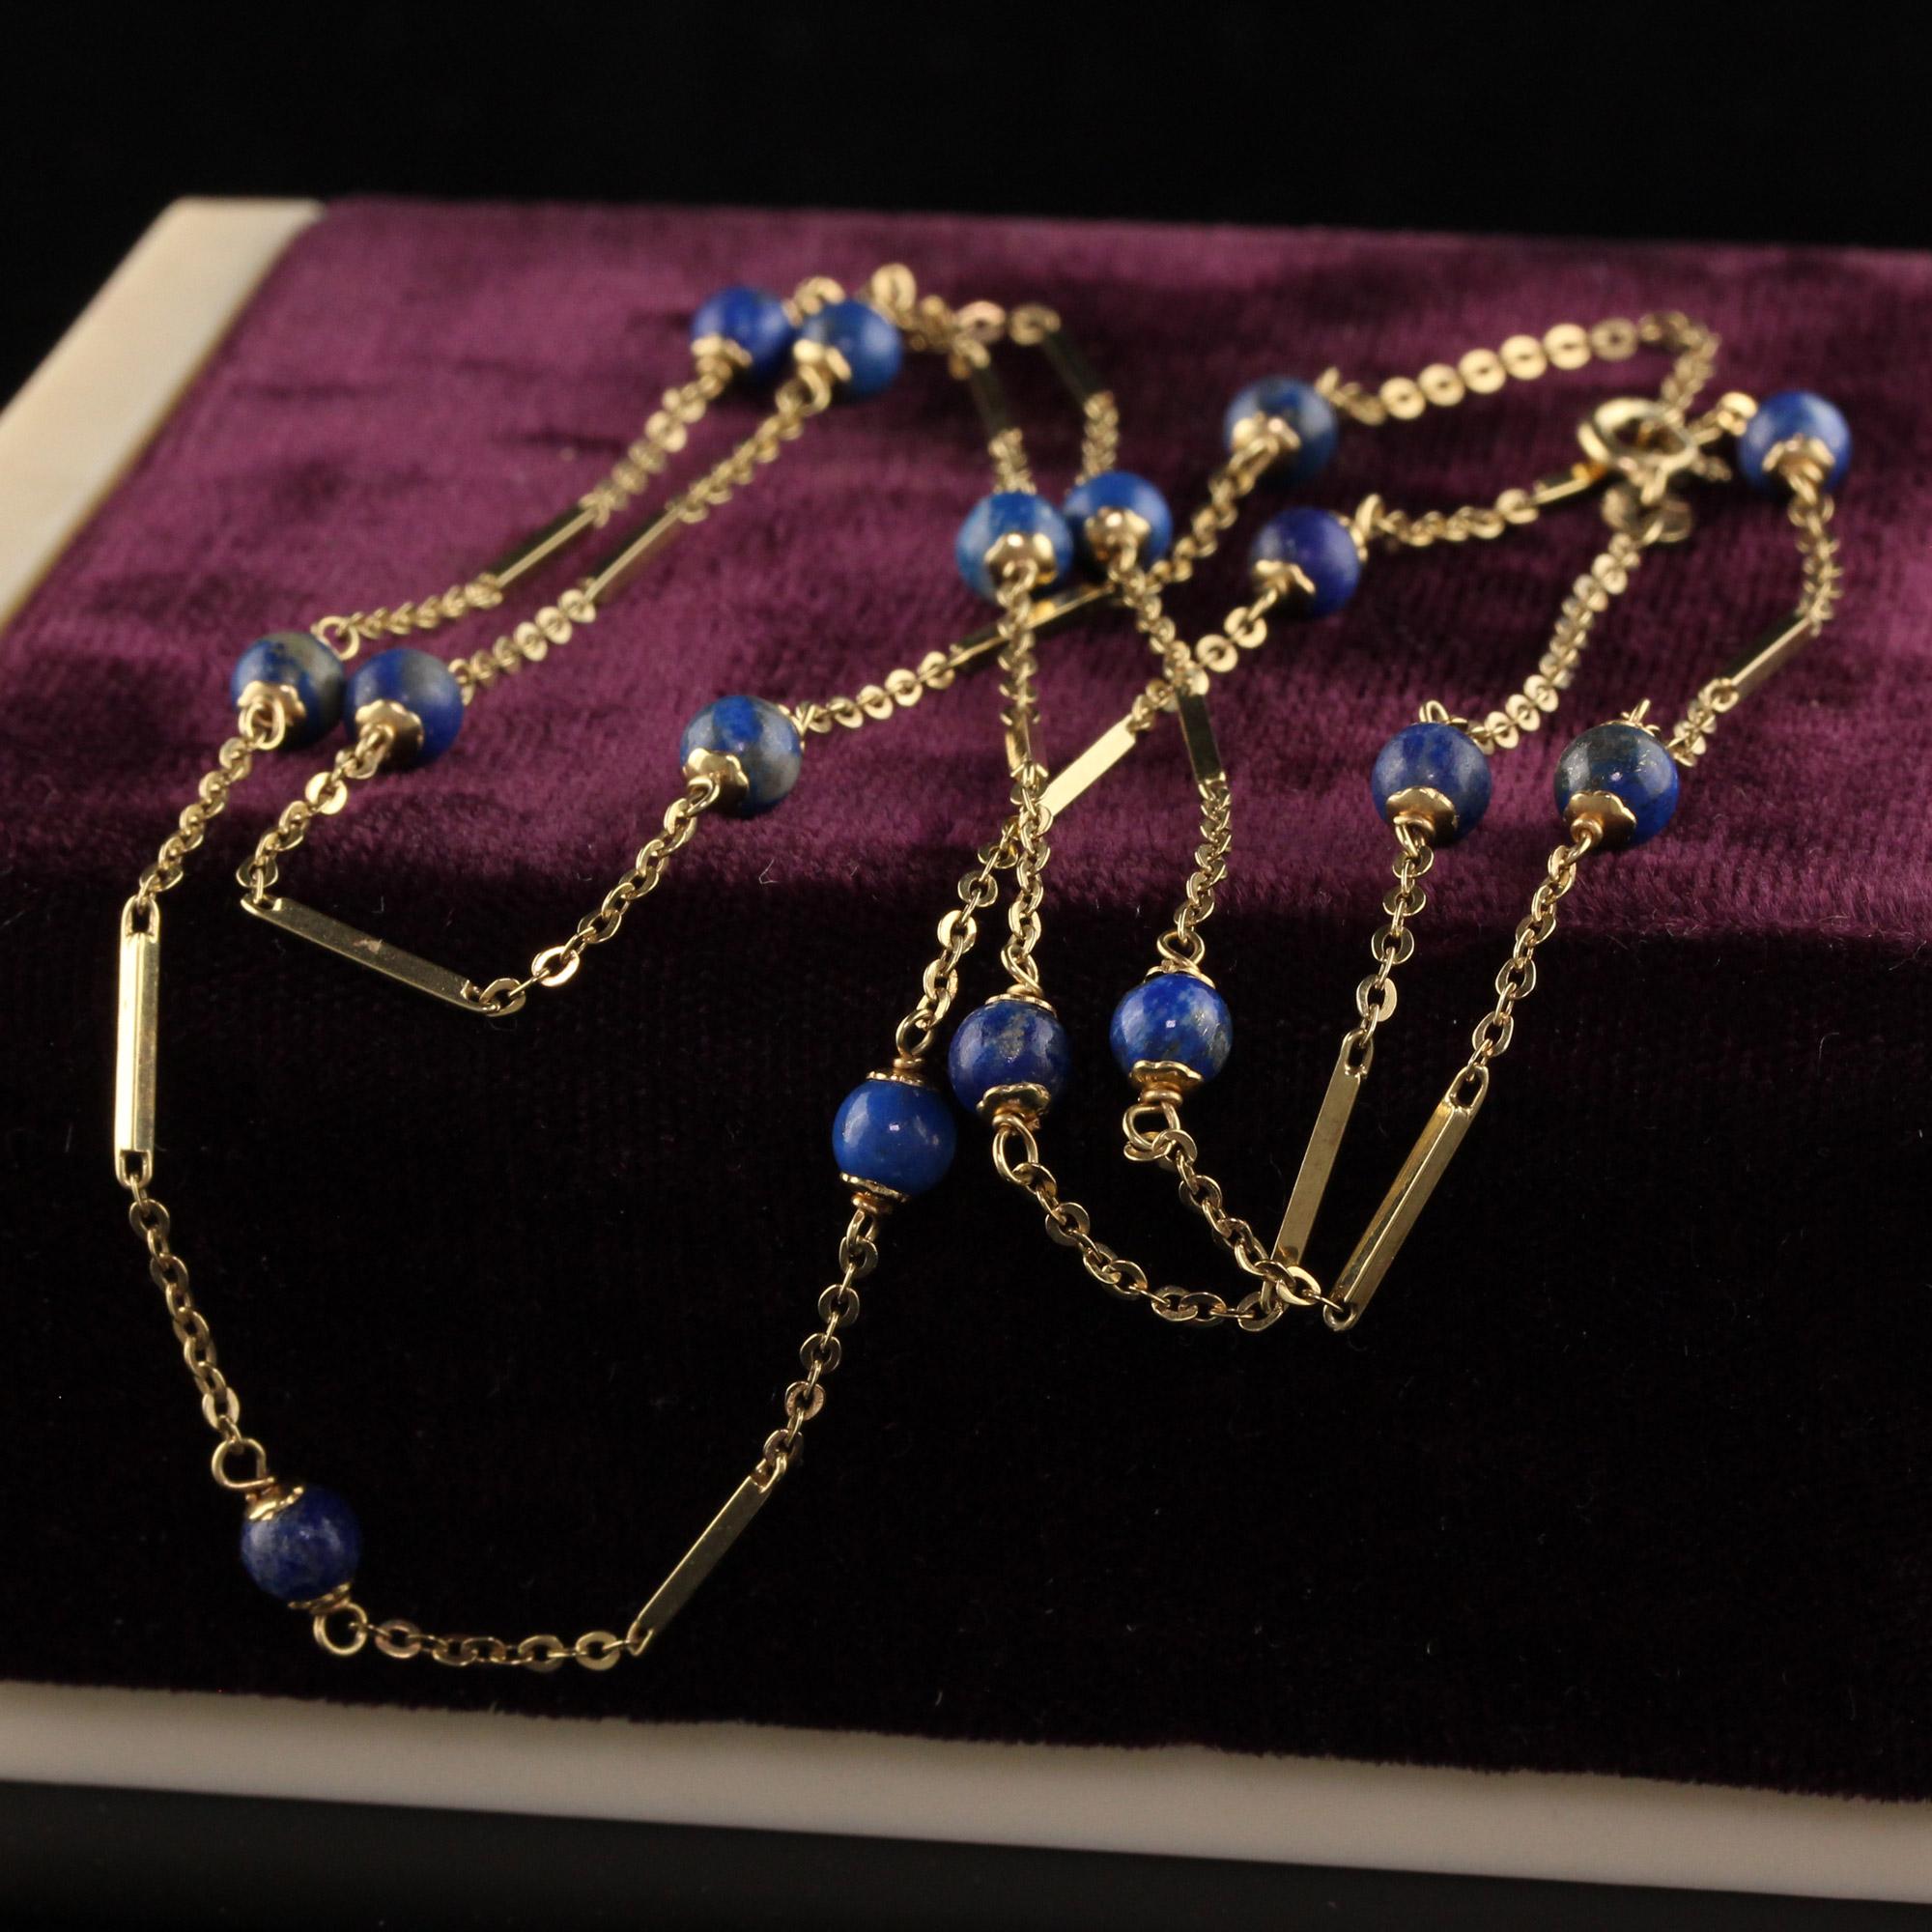 Beautiful Vintage Estate 14K Yellow Gold Lapis Bar Chain Necklace. This beautiful necklace is crafted in 14k yellow gold. The necklace has natural lapis balls on it and they are in great condition.

Item #N0090

Metal: 14K Yellow Gold

Weight: 9.2